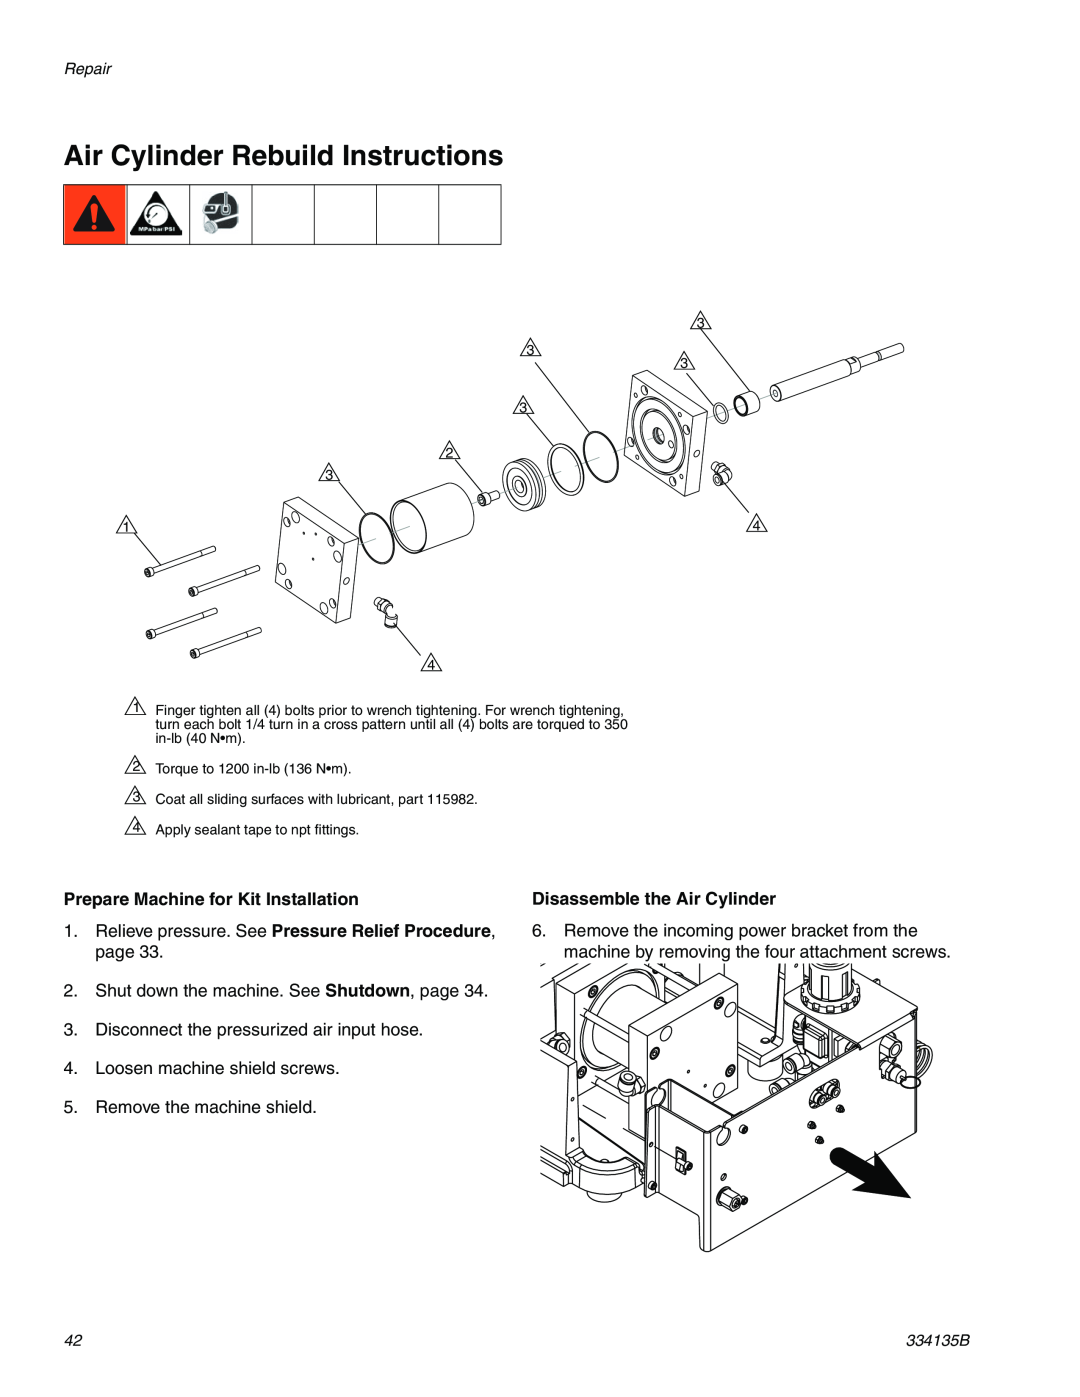 Graco 334135B Air Cylinder Rebuild Instructions, Disassemble the Air Cylinder, Prepare Machine for Kit Installation 